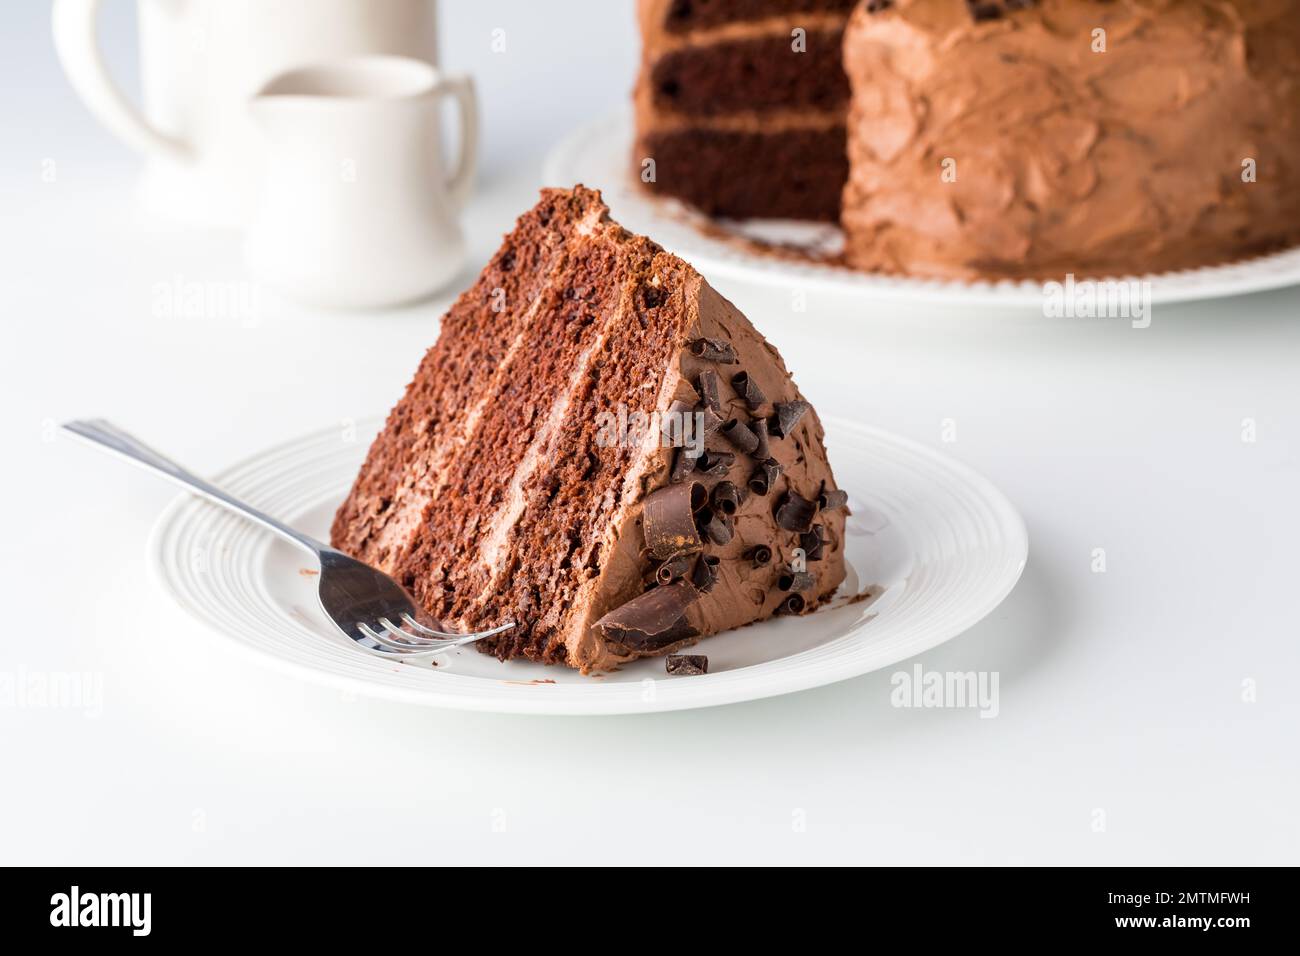 A large slice of triple layered decadent chocolate cake, ready for eating. Stock Photo